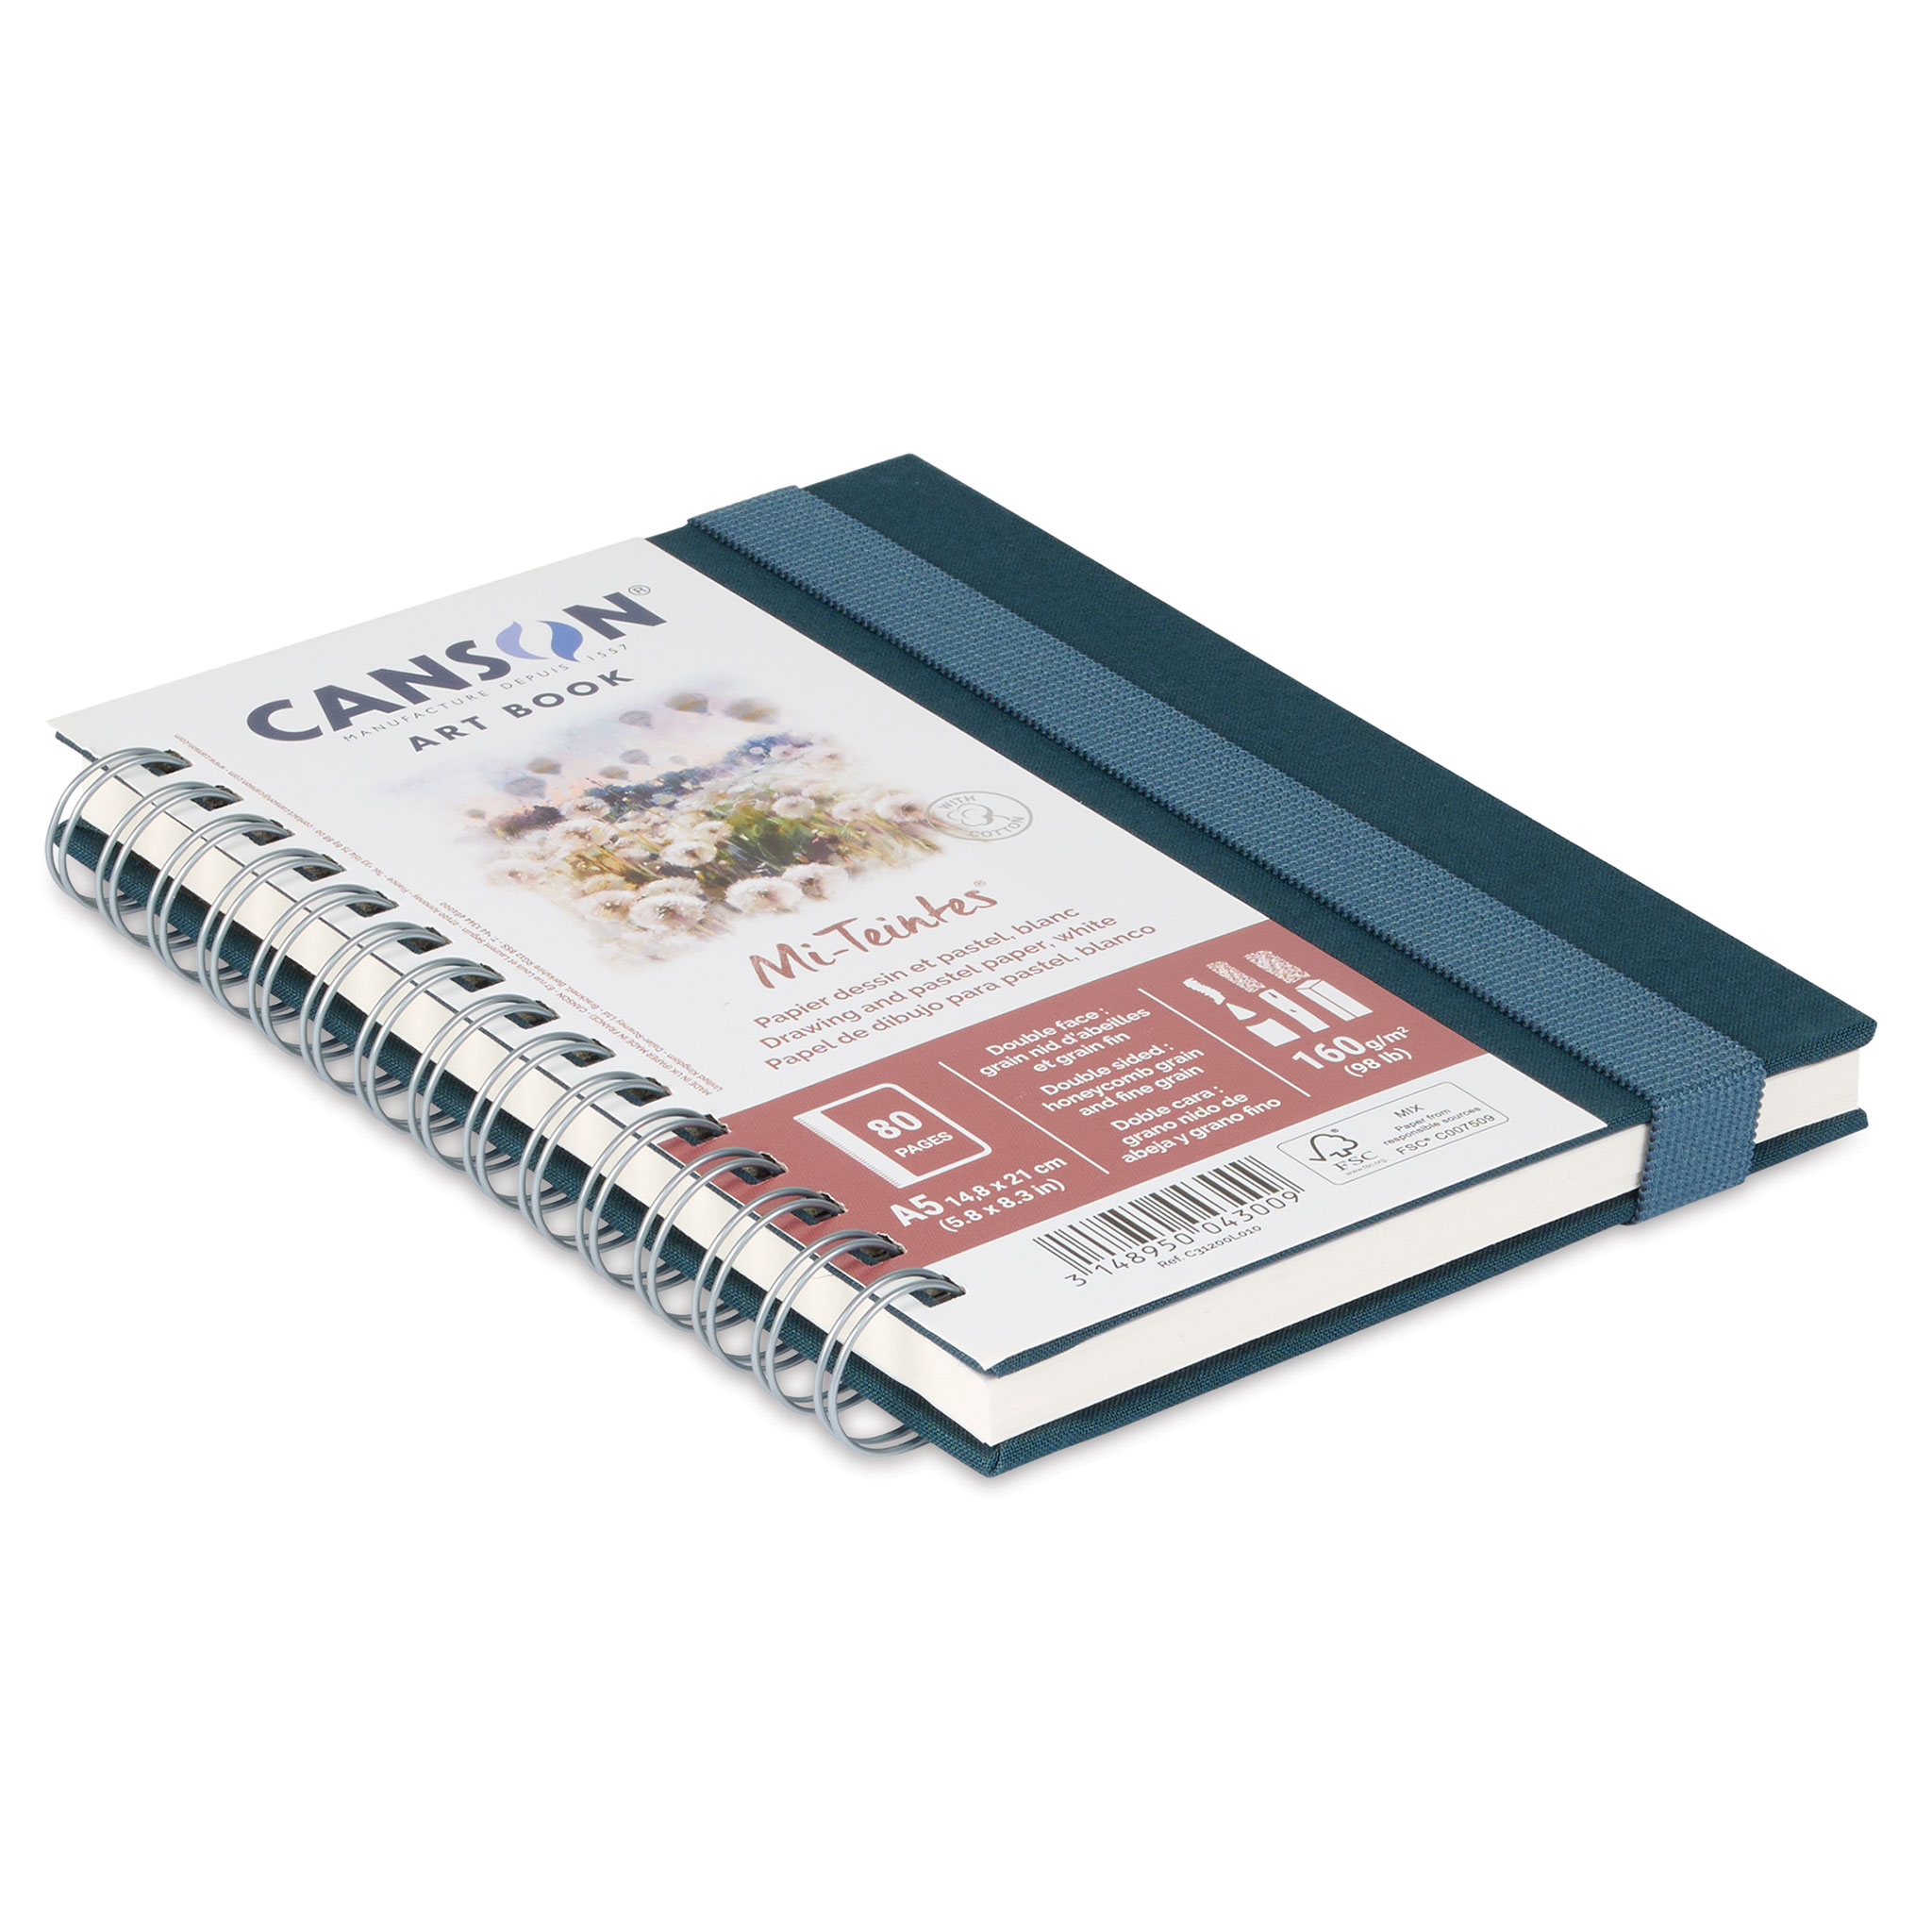 Notebook Professional Drawing  Canson Drawing Paper 1557